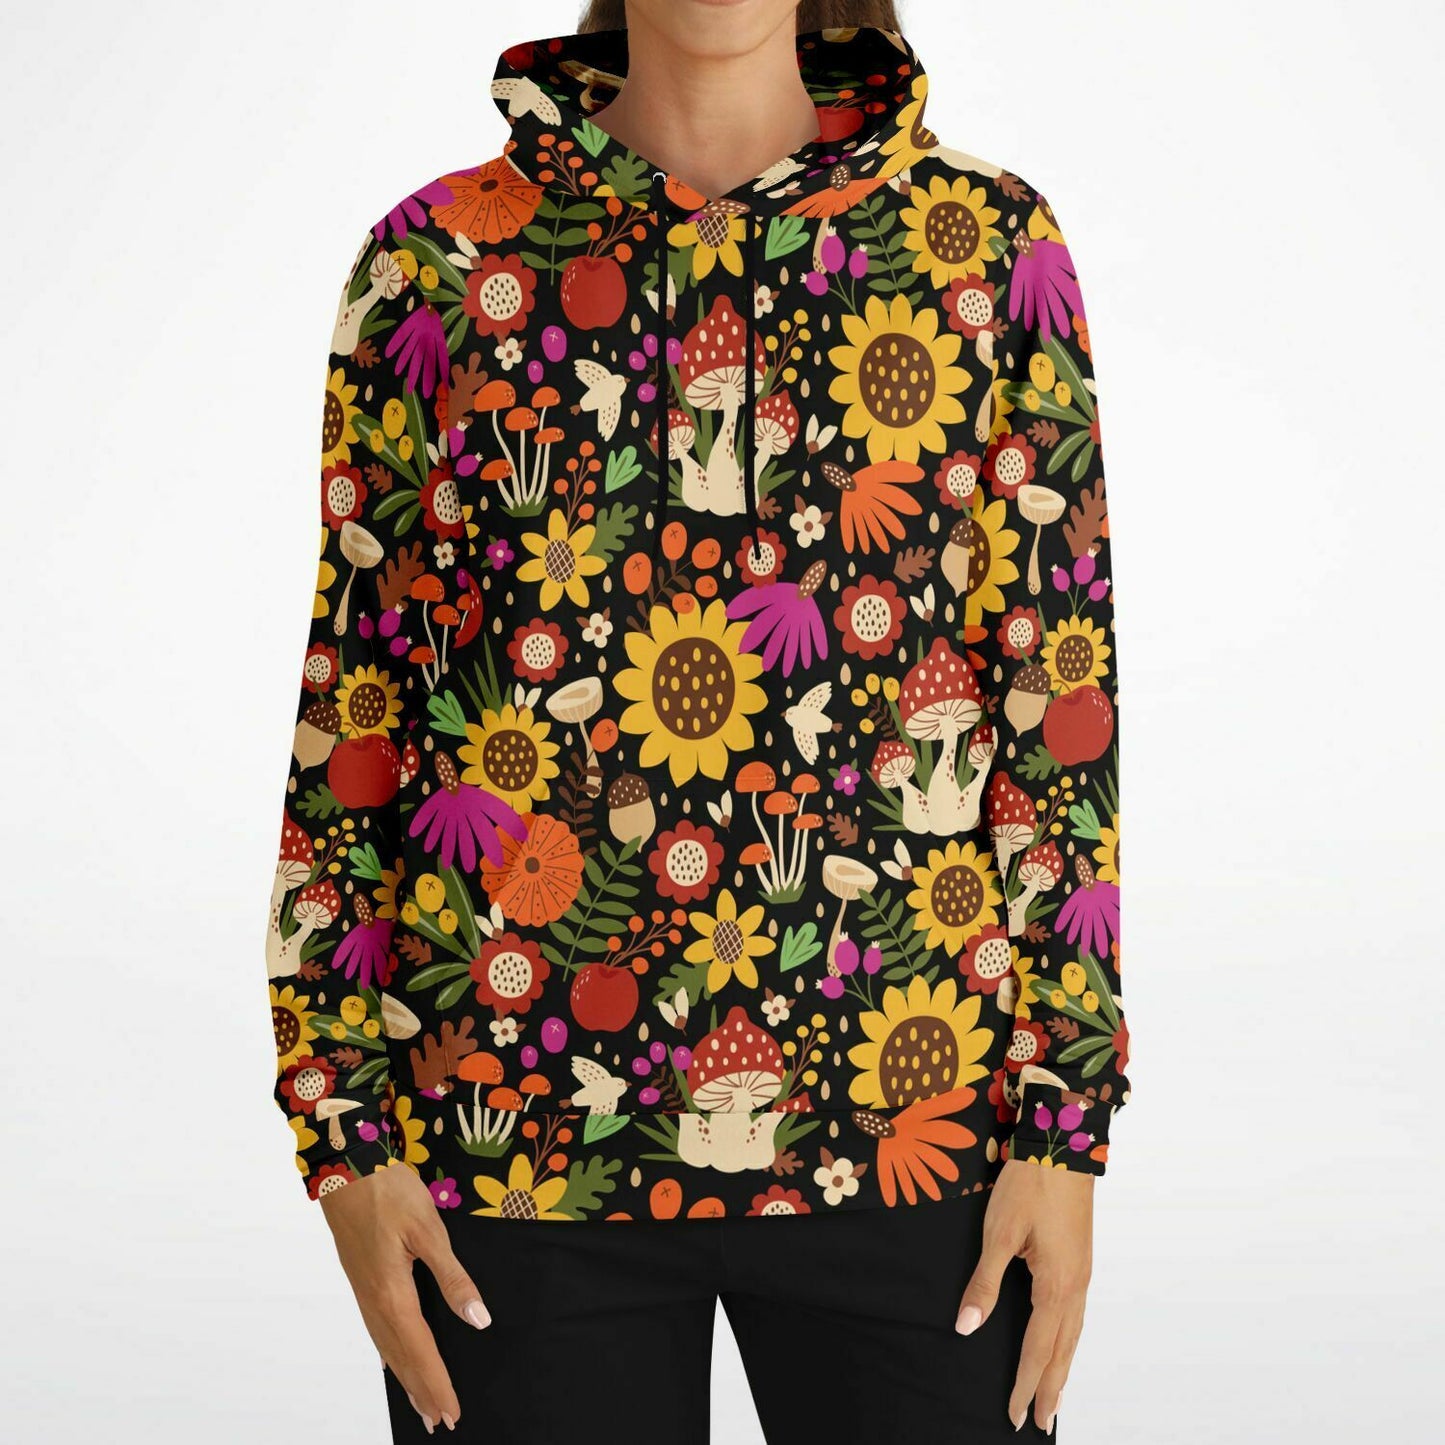 Mushroom Hoodie, Sunflower Floral Birds Pullover Men Women Adult Aesthetic Graphic Cotton Hooded Sweatshirt with Pockets